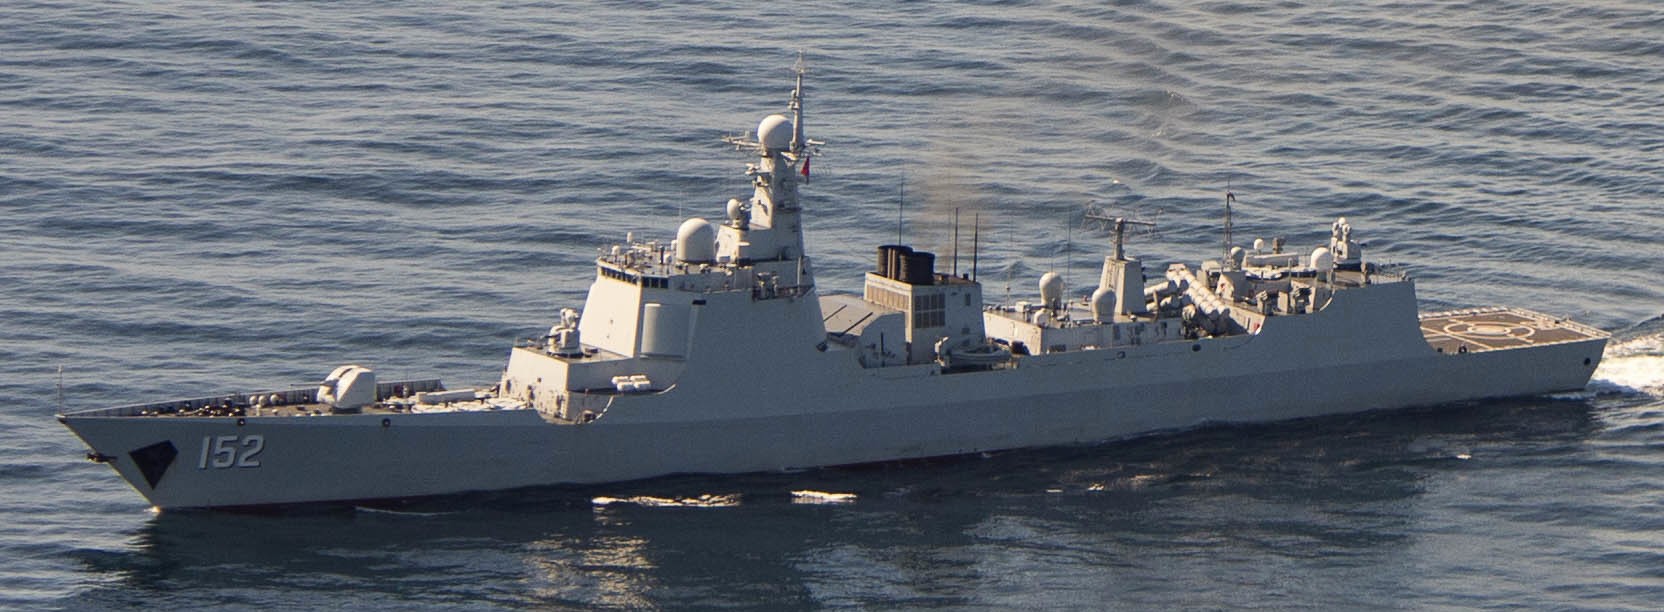 ddg-152 plans jinan type 052c class guided missile destroyer china people's liberation army navy 07